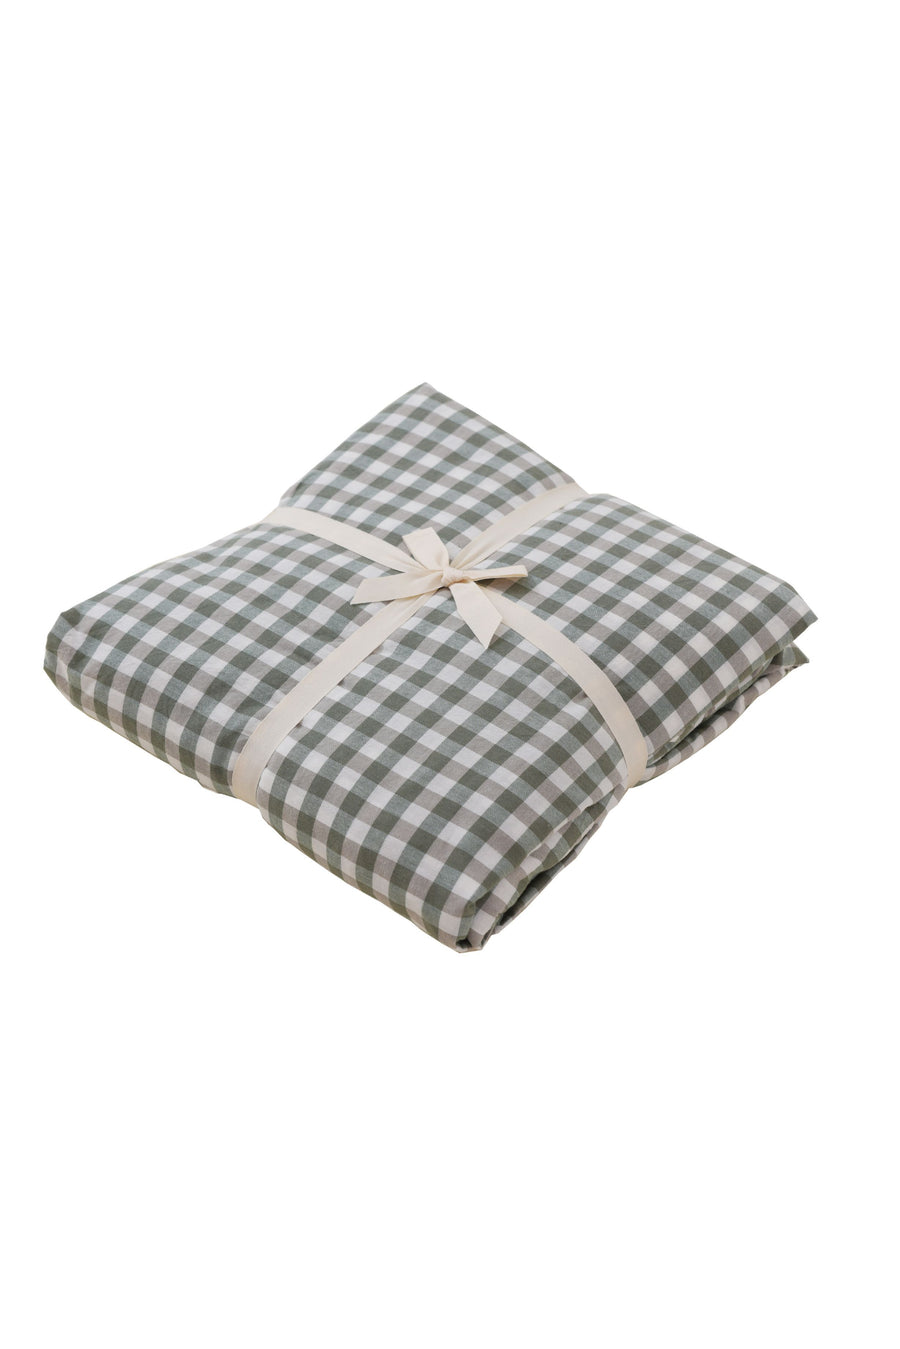 Elly Gingham SS 3-pc Fitted Sheet Set (Dark Green)